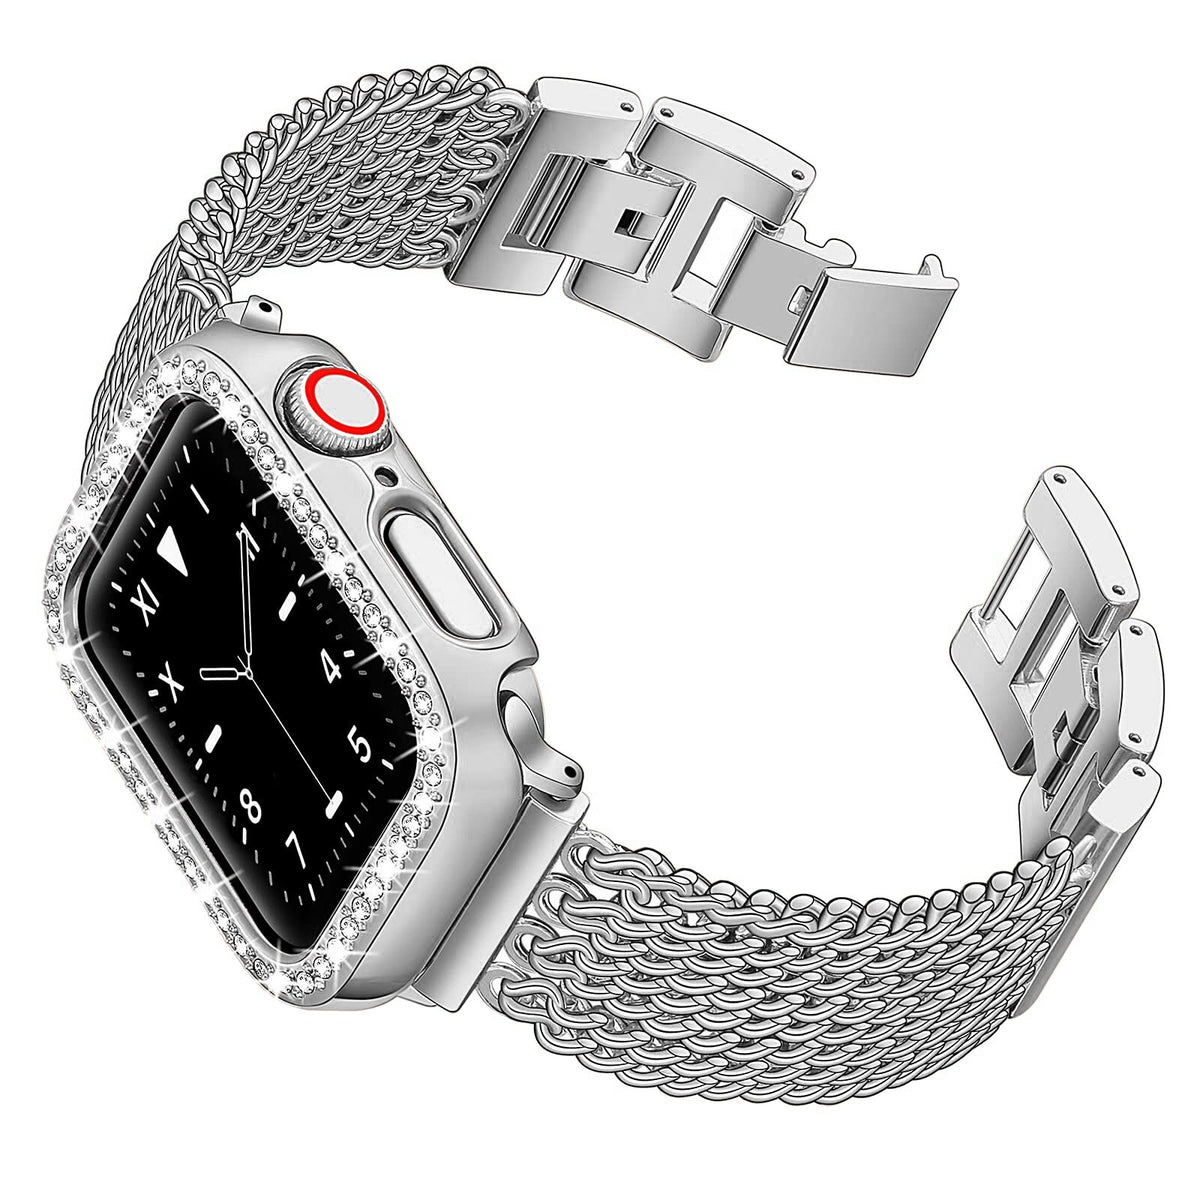 Metal Band for Apple Watch Chain Band+Case